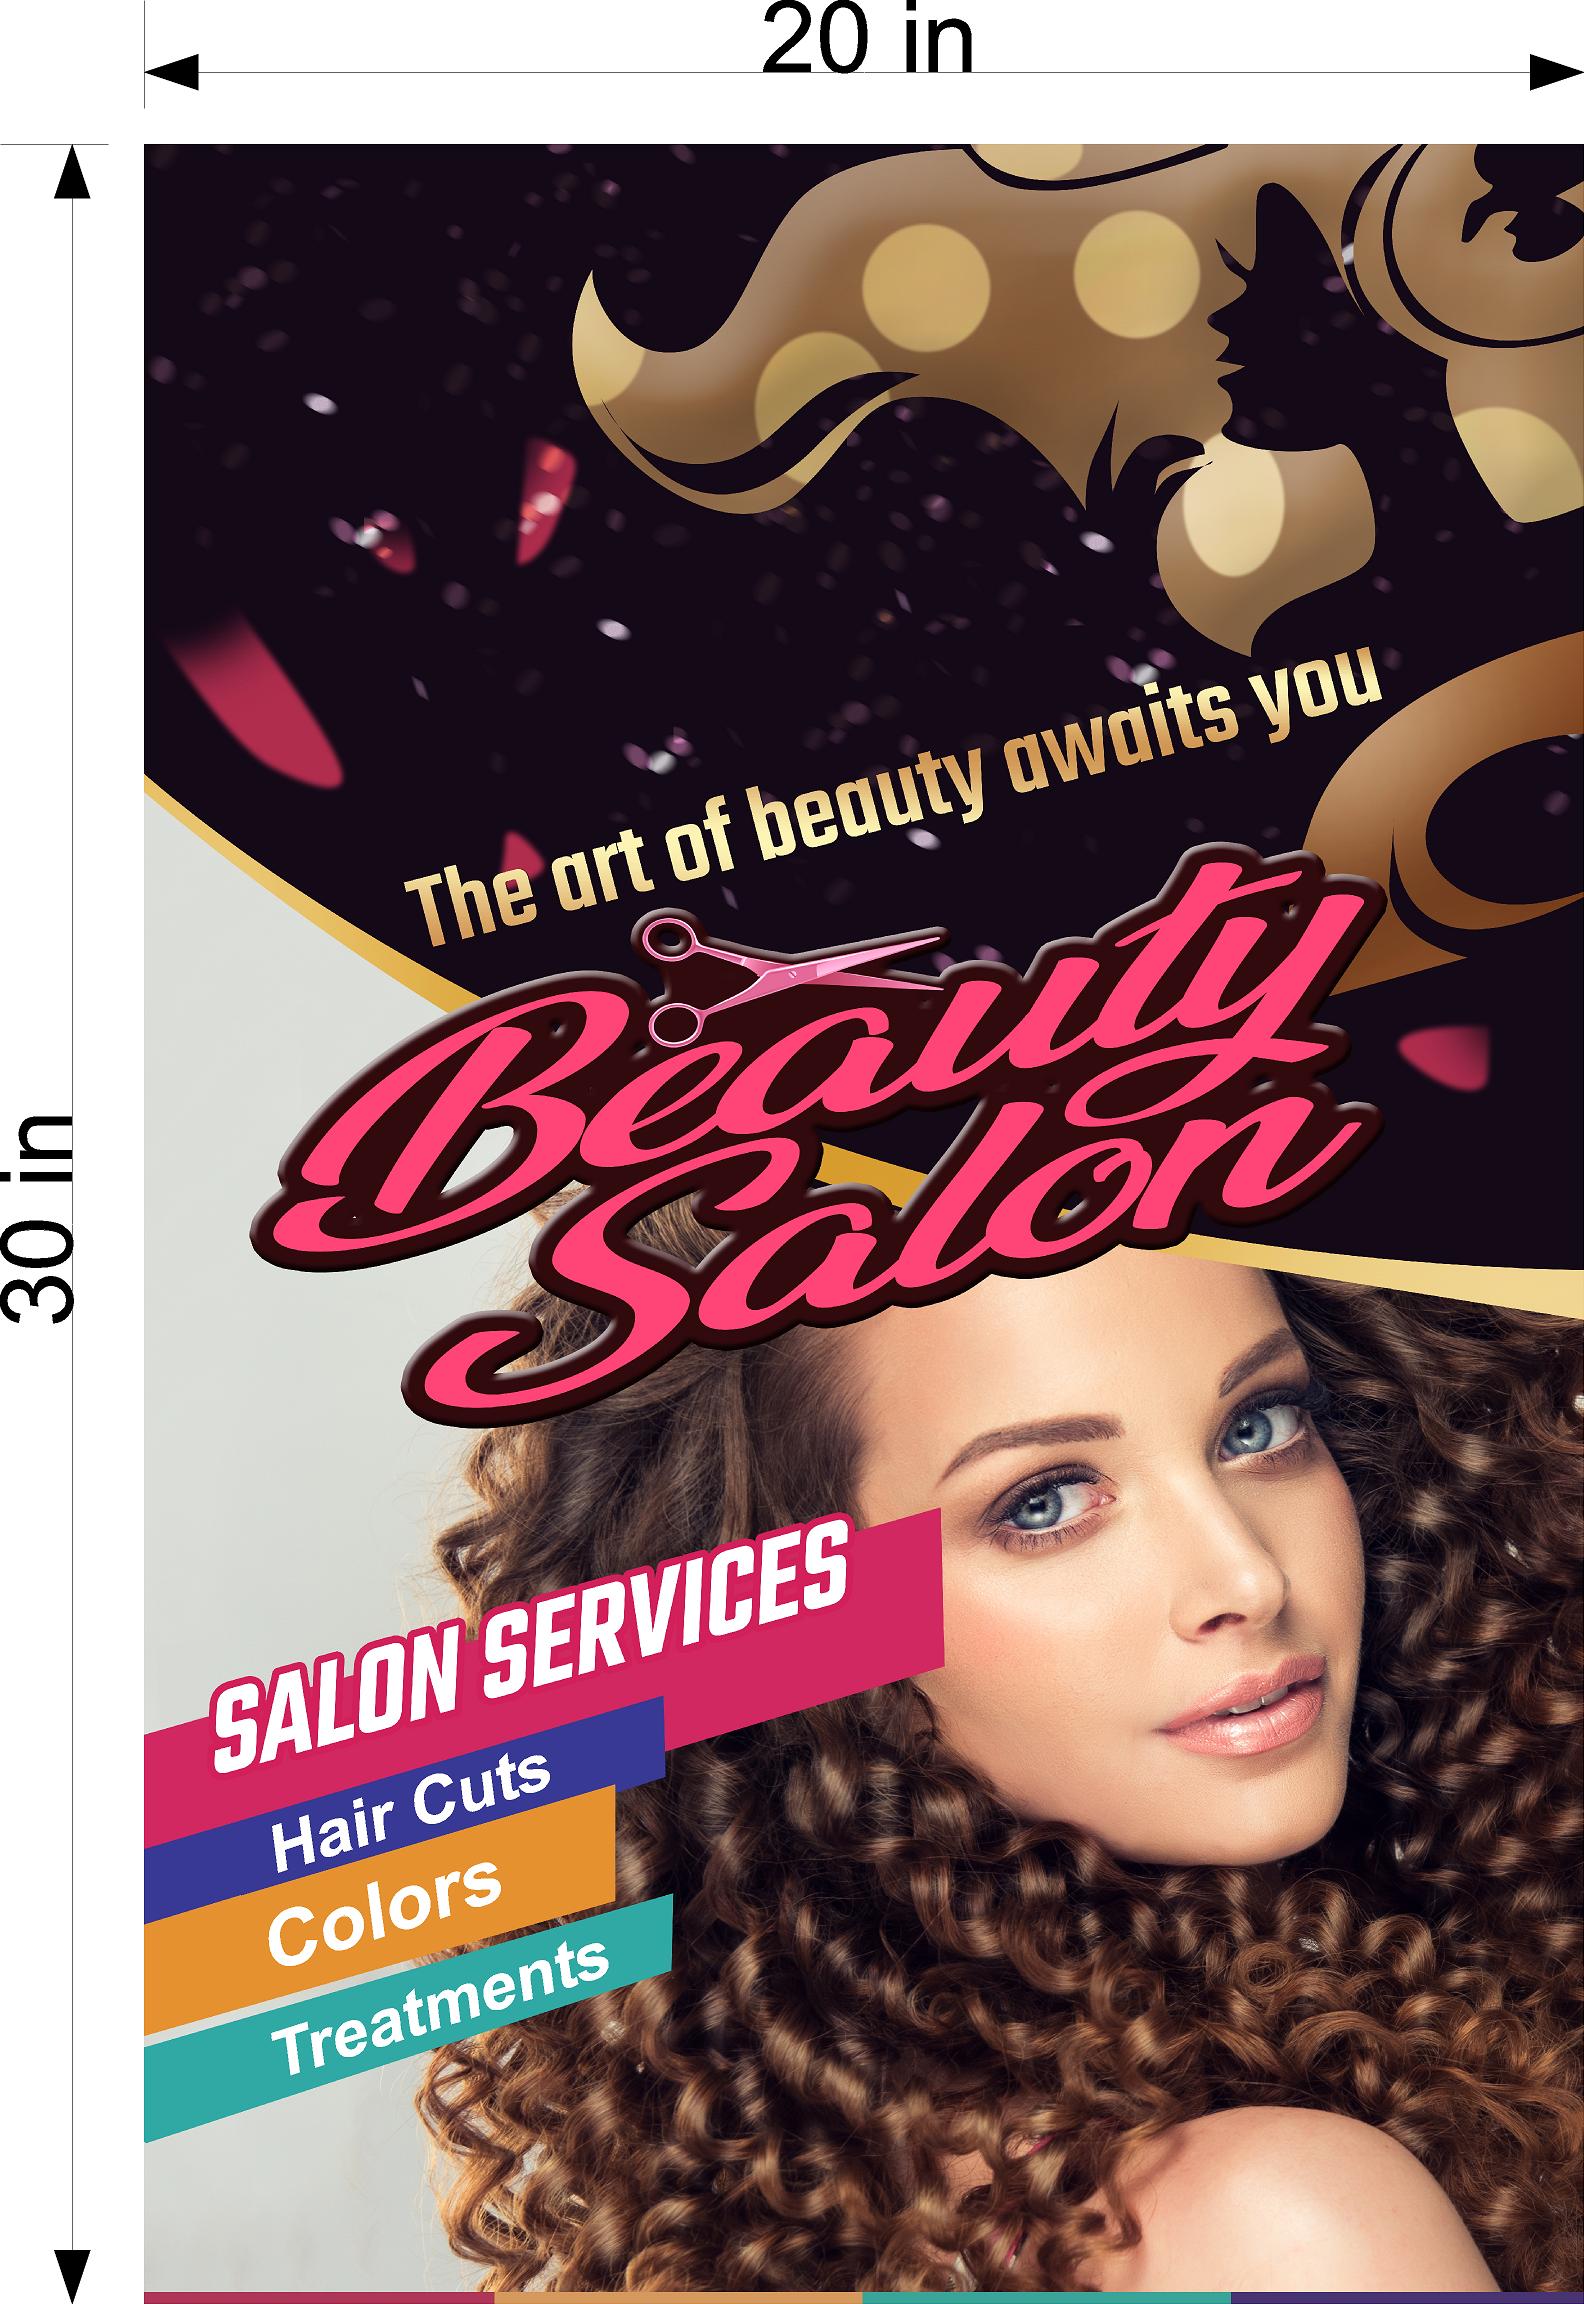 Salon 42 Photo-Realistic Paper Poster Premium Interior Inside Sign Wall Window Non-Laminated Haircut BeautyVertical